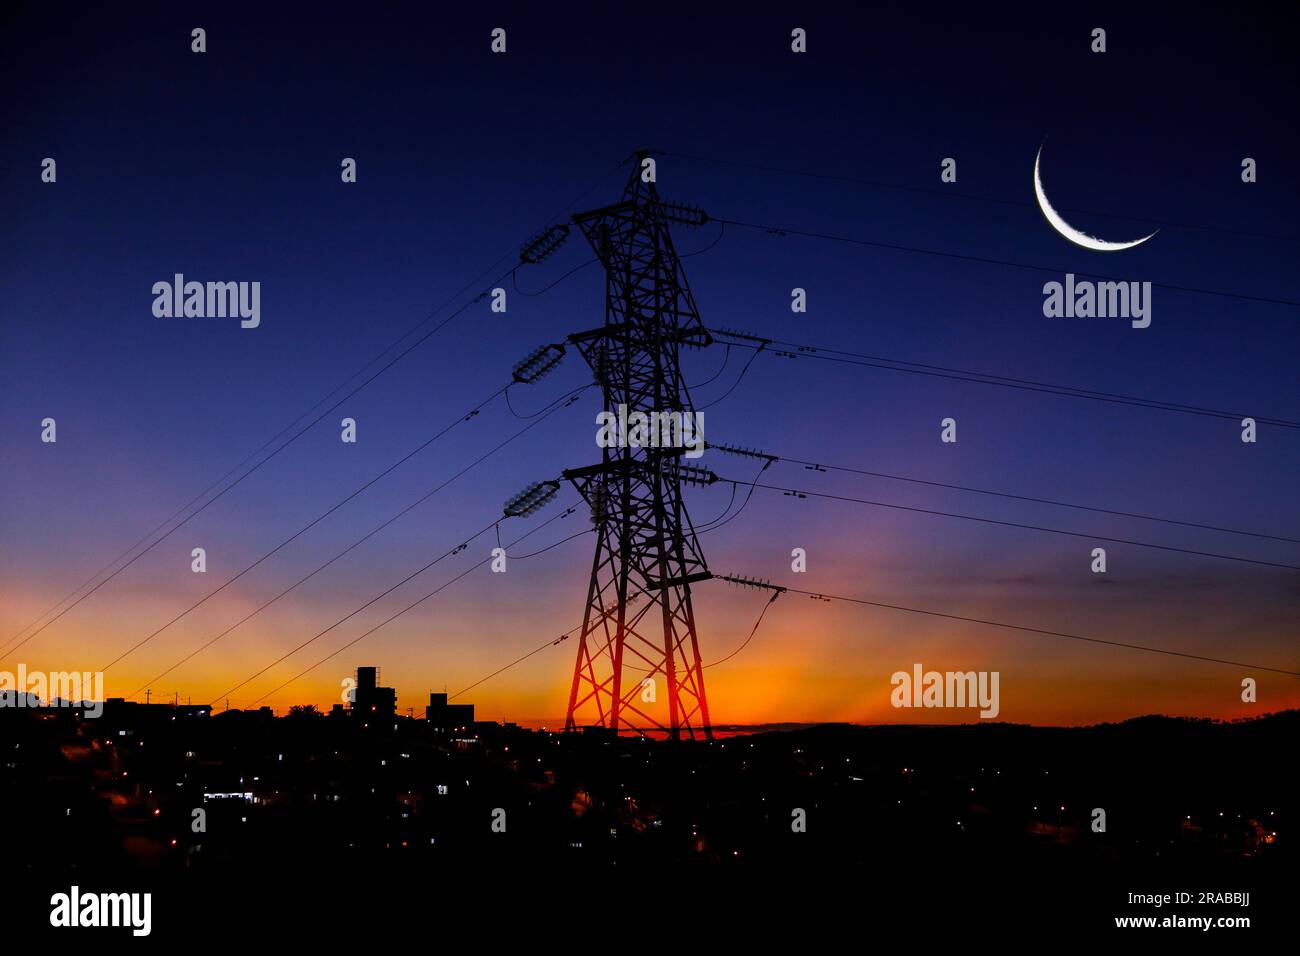 Electricity transmission tower silhouetted against blue sky at dusk Stock Photo